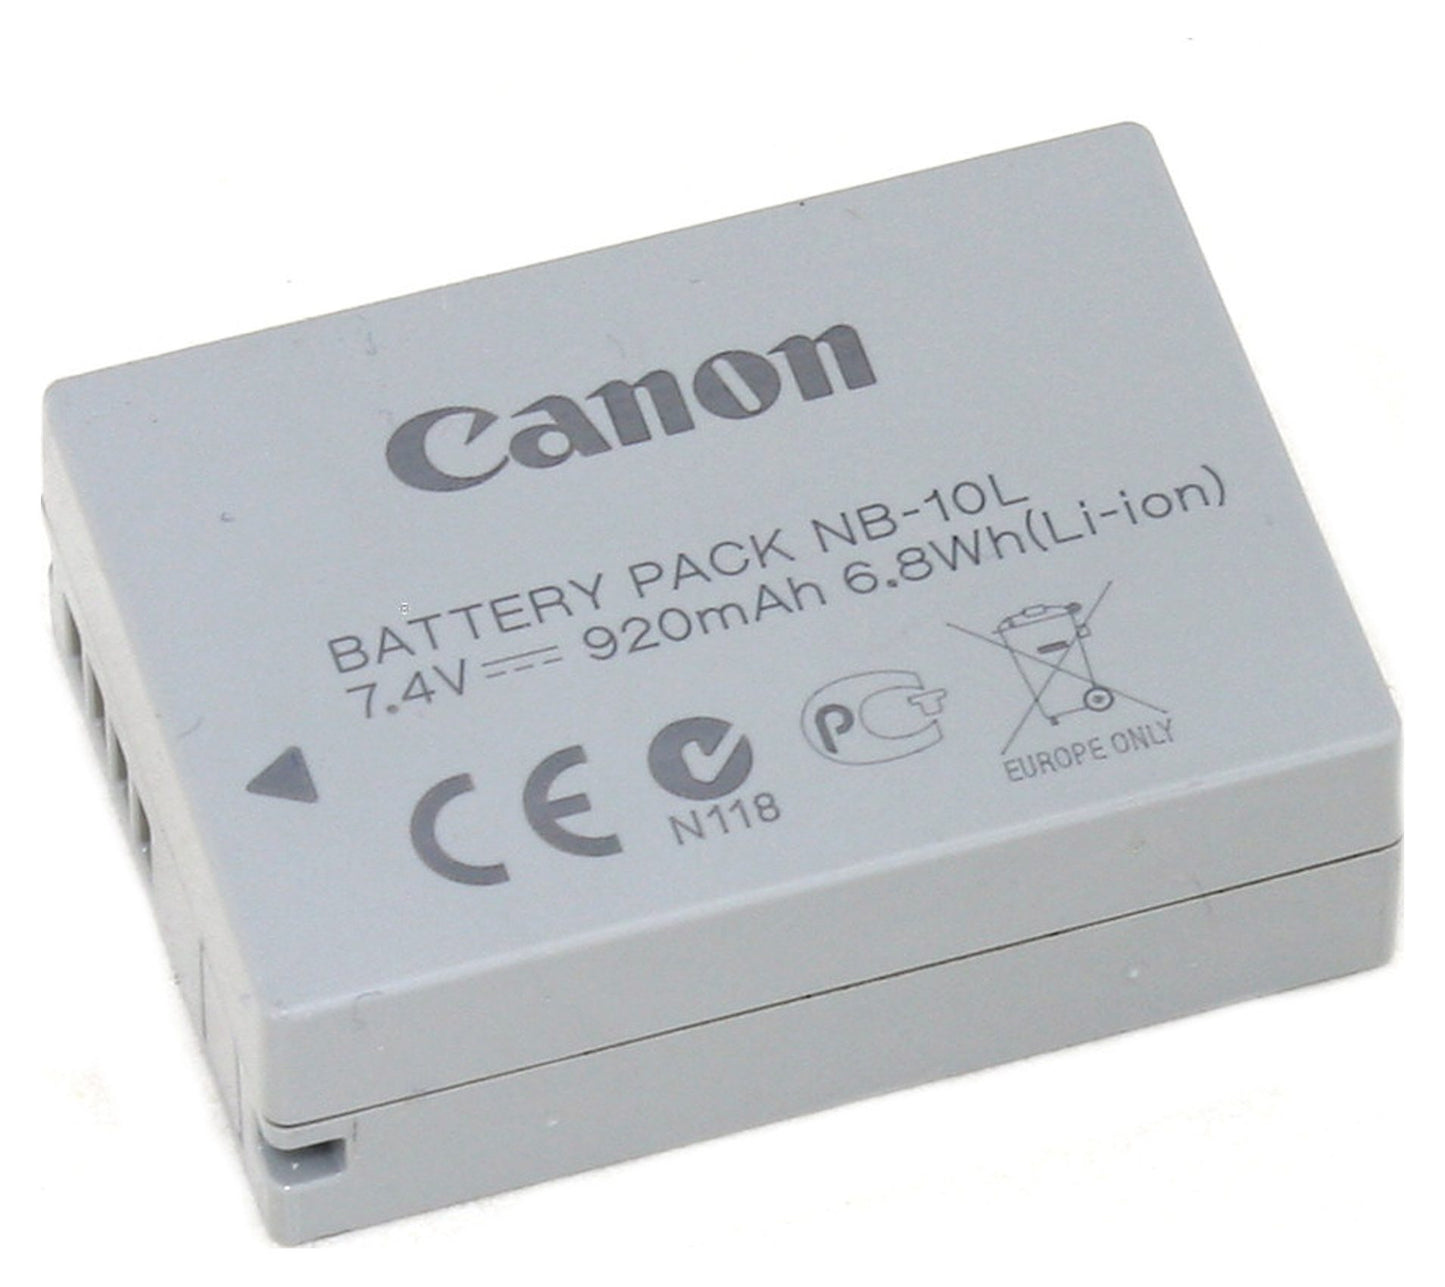 Pxel Canon NB-10L Replacement Lithium-Ion Rechargeable Battery 7.4V 920mAh for Powershot SX40/SX50/SX60 HS and G15 (Class A)